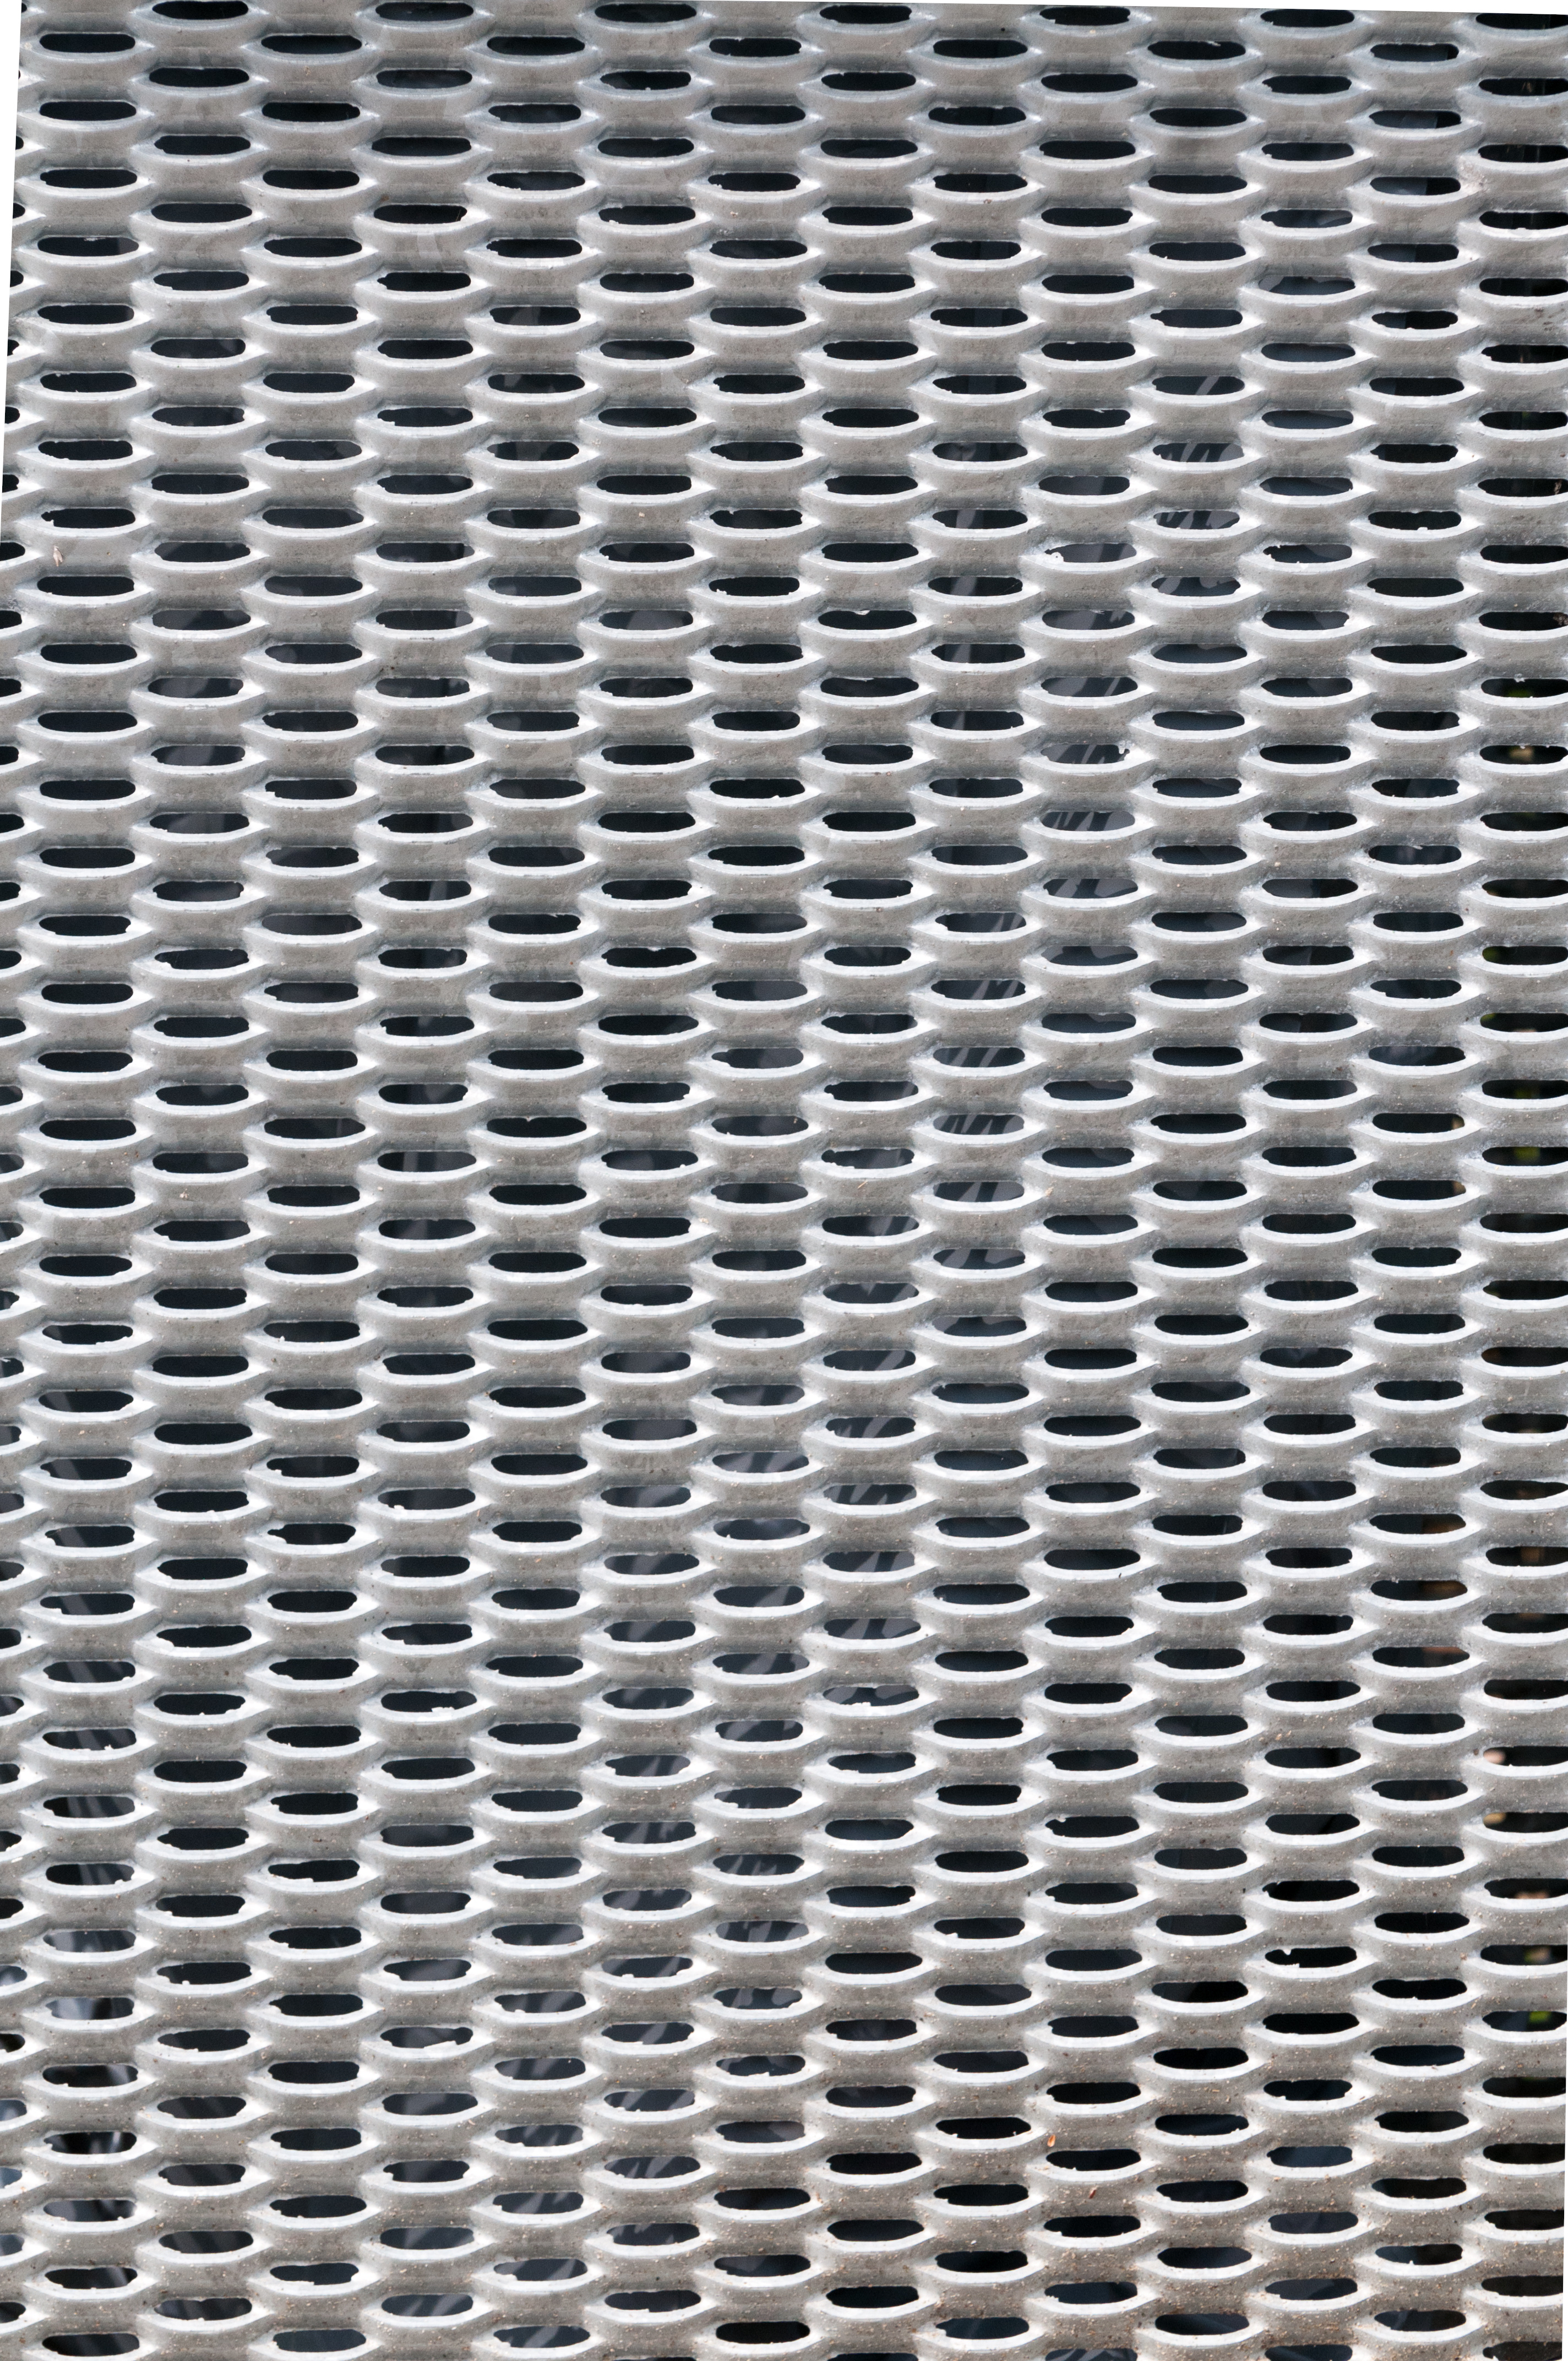 perforated metal background - Patternpictures.com